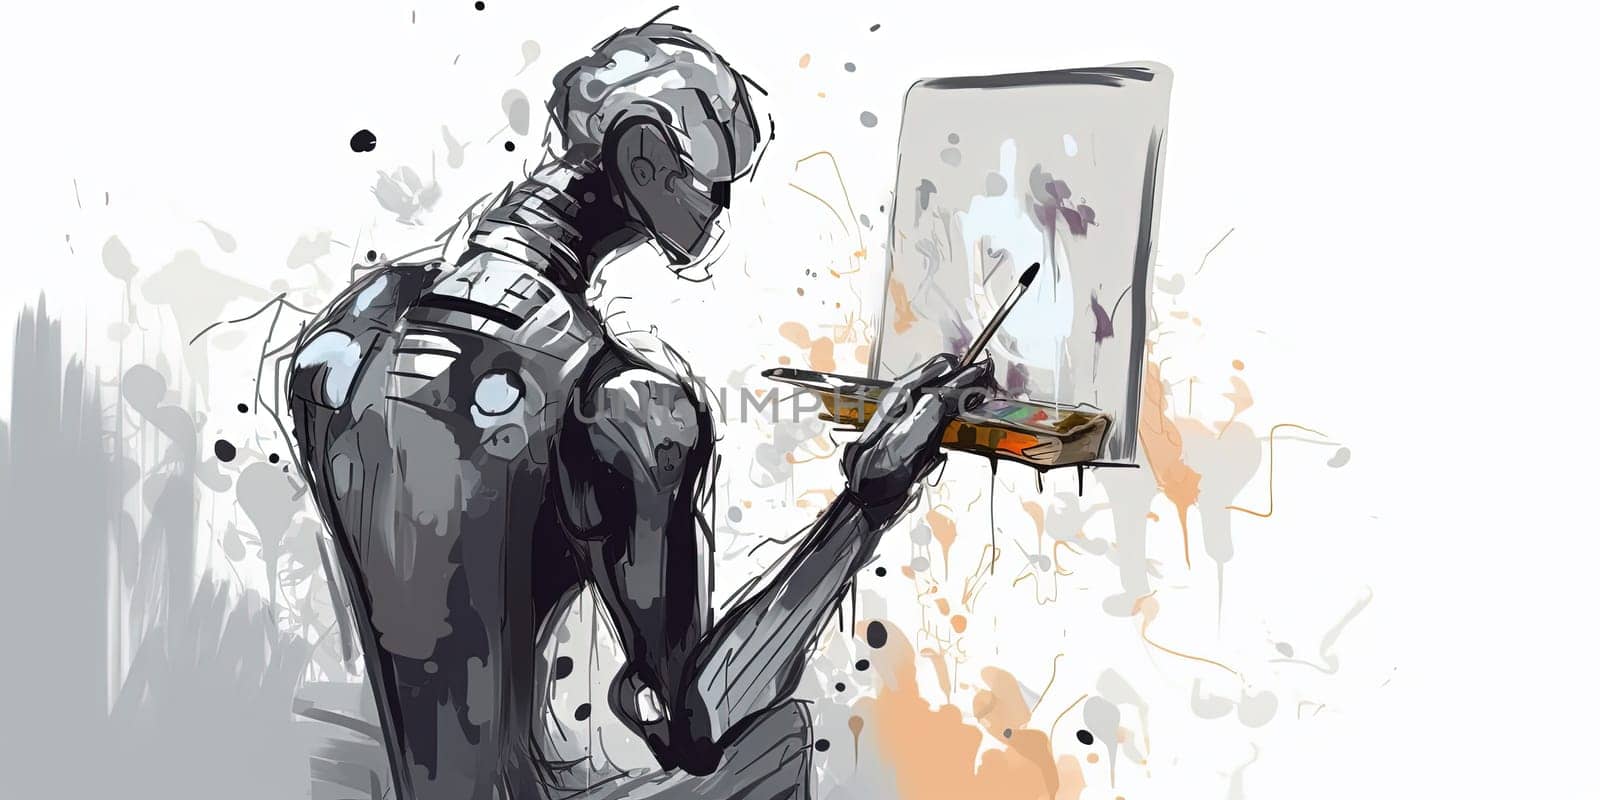 Android Robot Painting Arts On A Canvas by GekaSkr